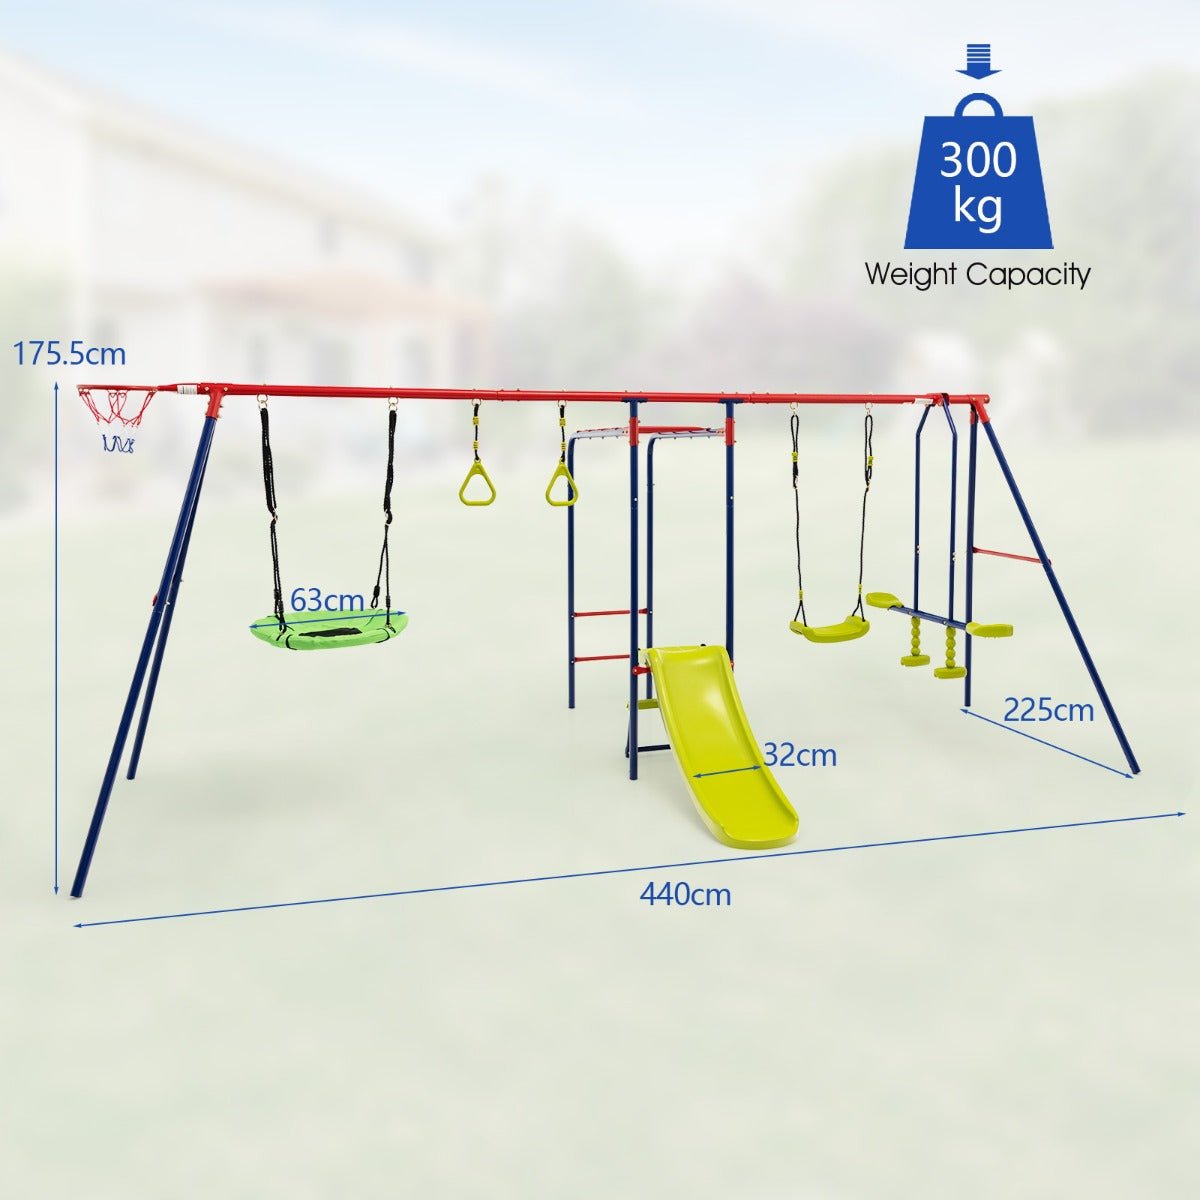 All-in-One 7-in-1 Swing Set with Ground Stakes: Adventure Awaits